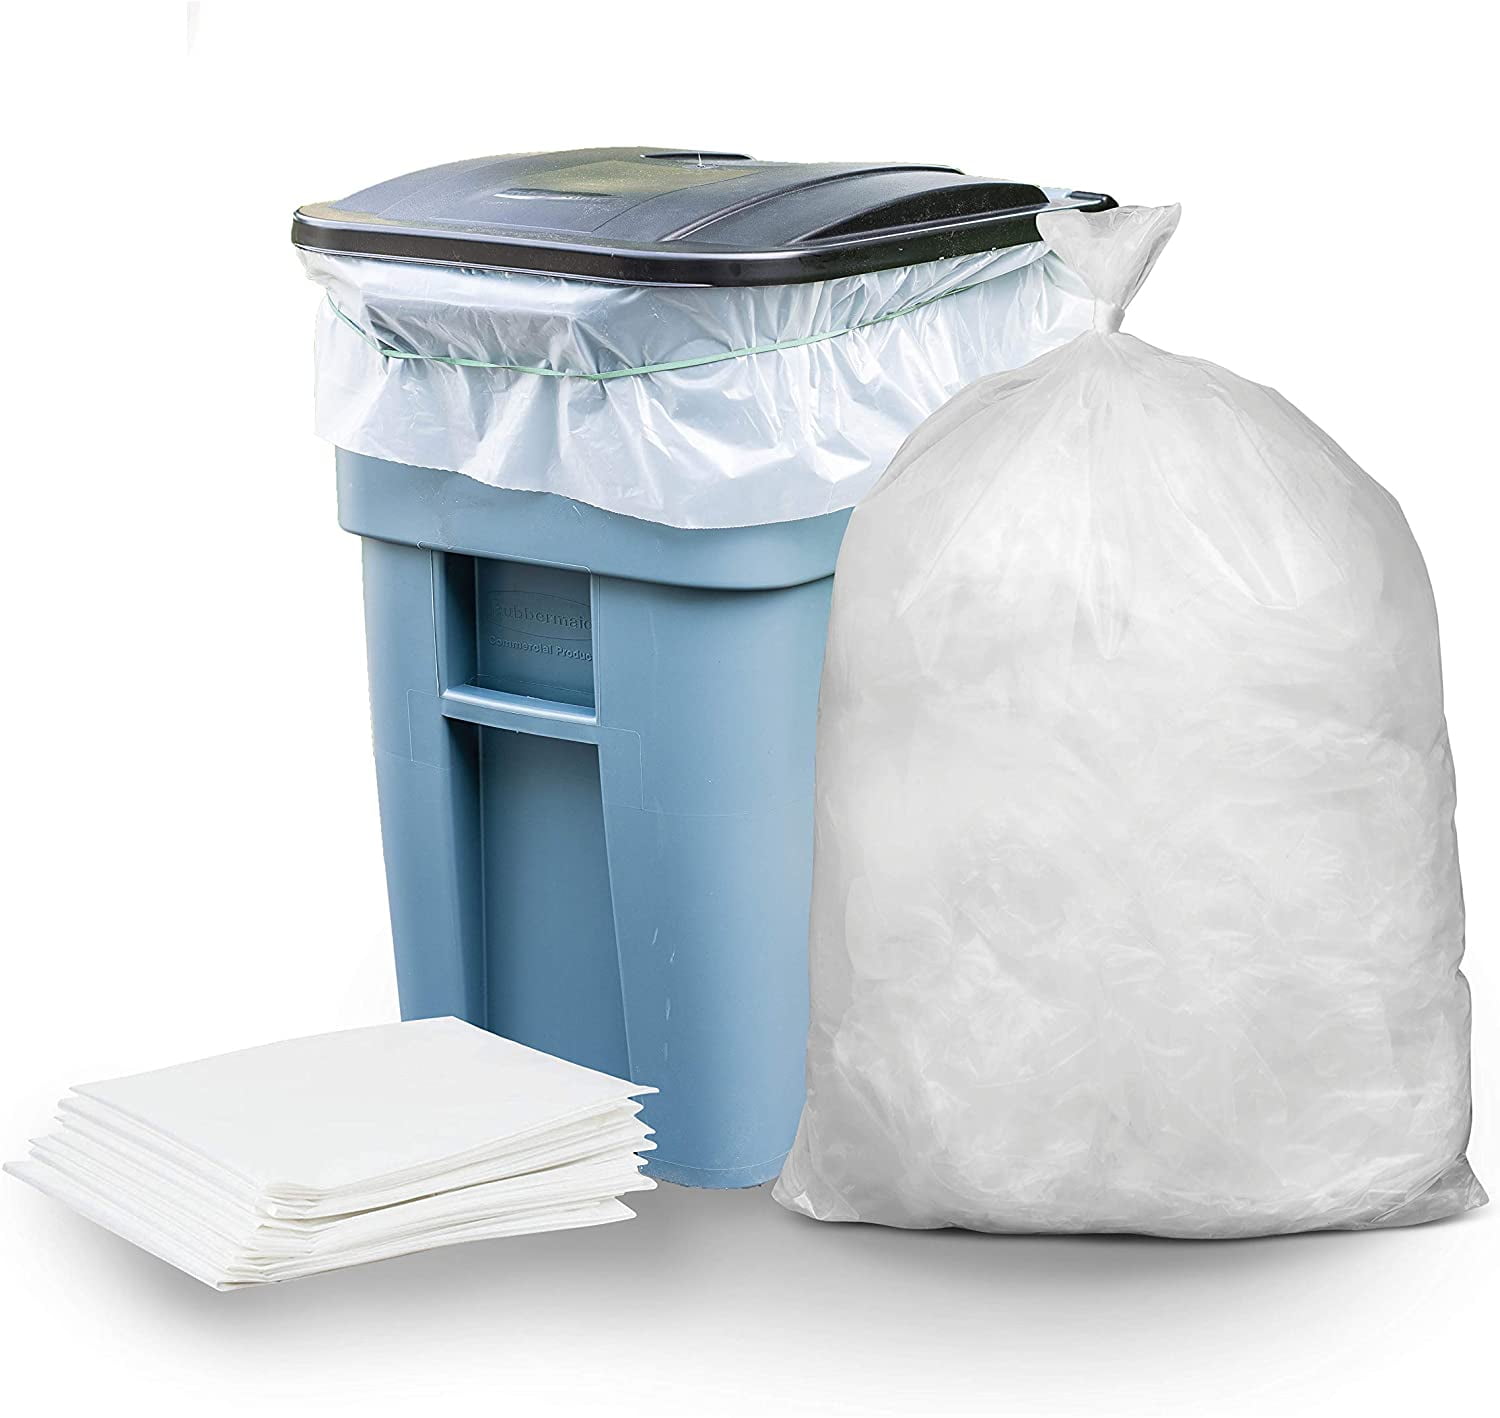 Extra Large Heavy Duty Clear Plastic Recycling Trash Bags 90 Gallon 50 Count Wholesale w/Ties 96 Gallon 100 Gallon Clear 95 Gallon 95-96 Gallon Trash Bags, 